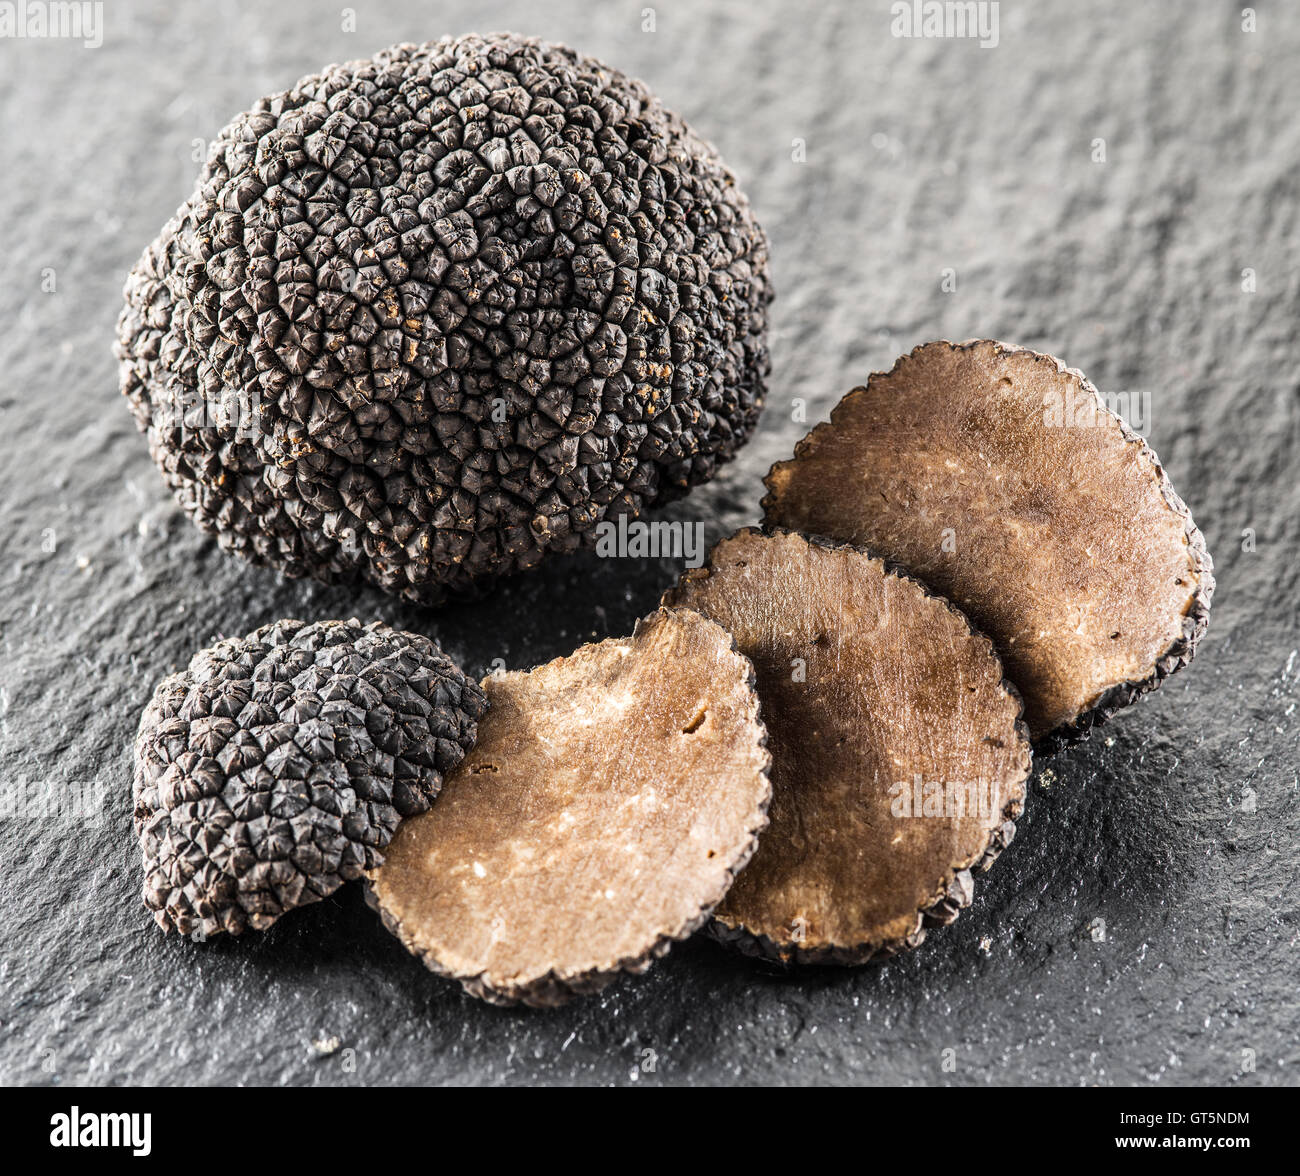 Black truffles and truffle slices on the graphite board. Stock Photo